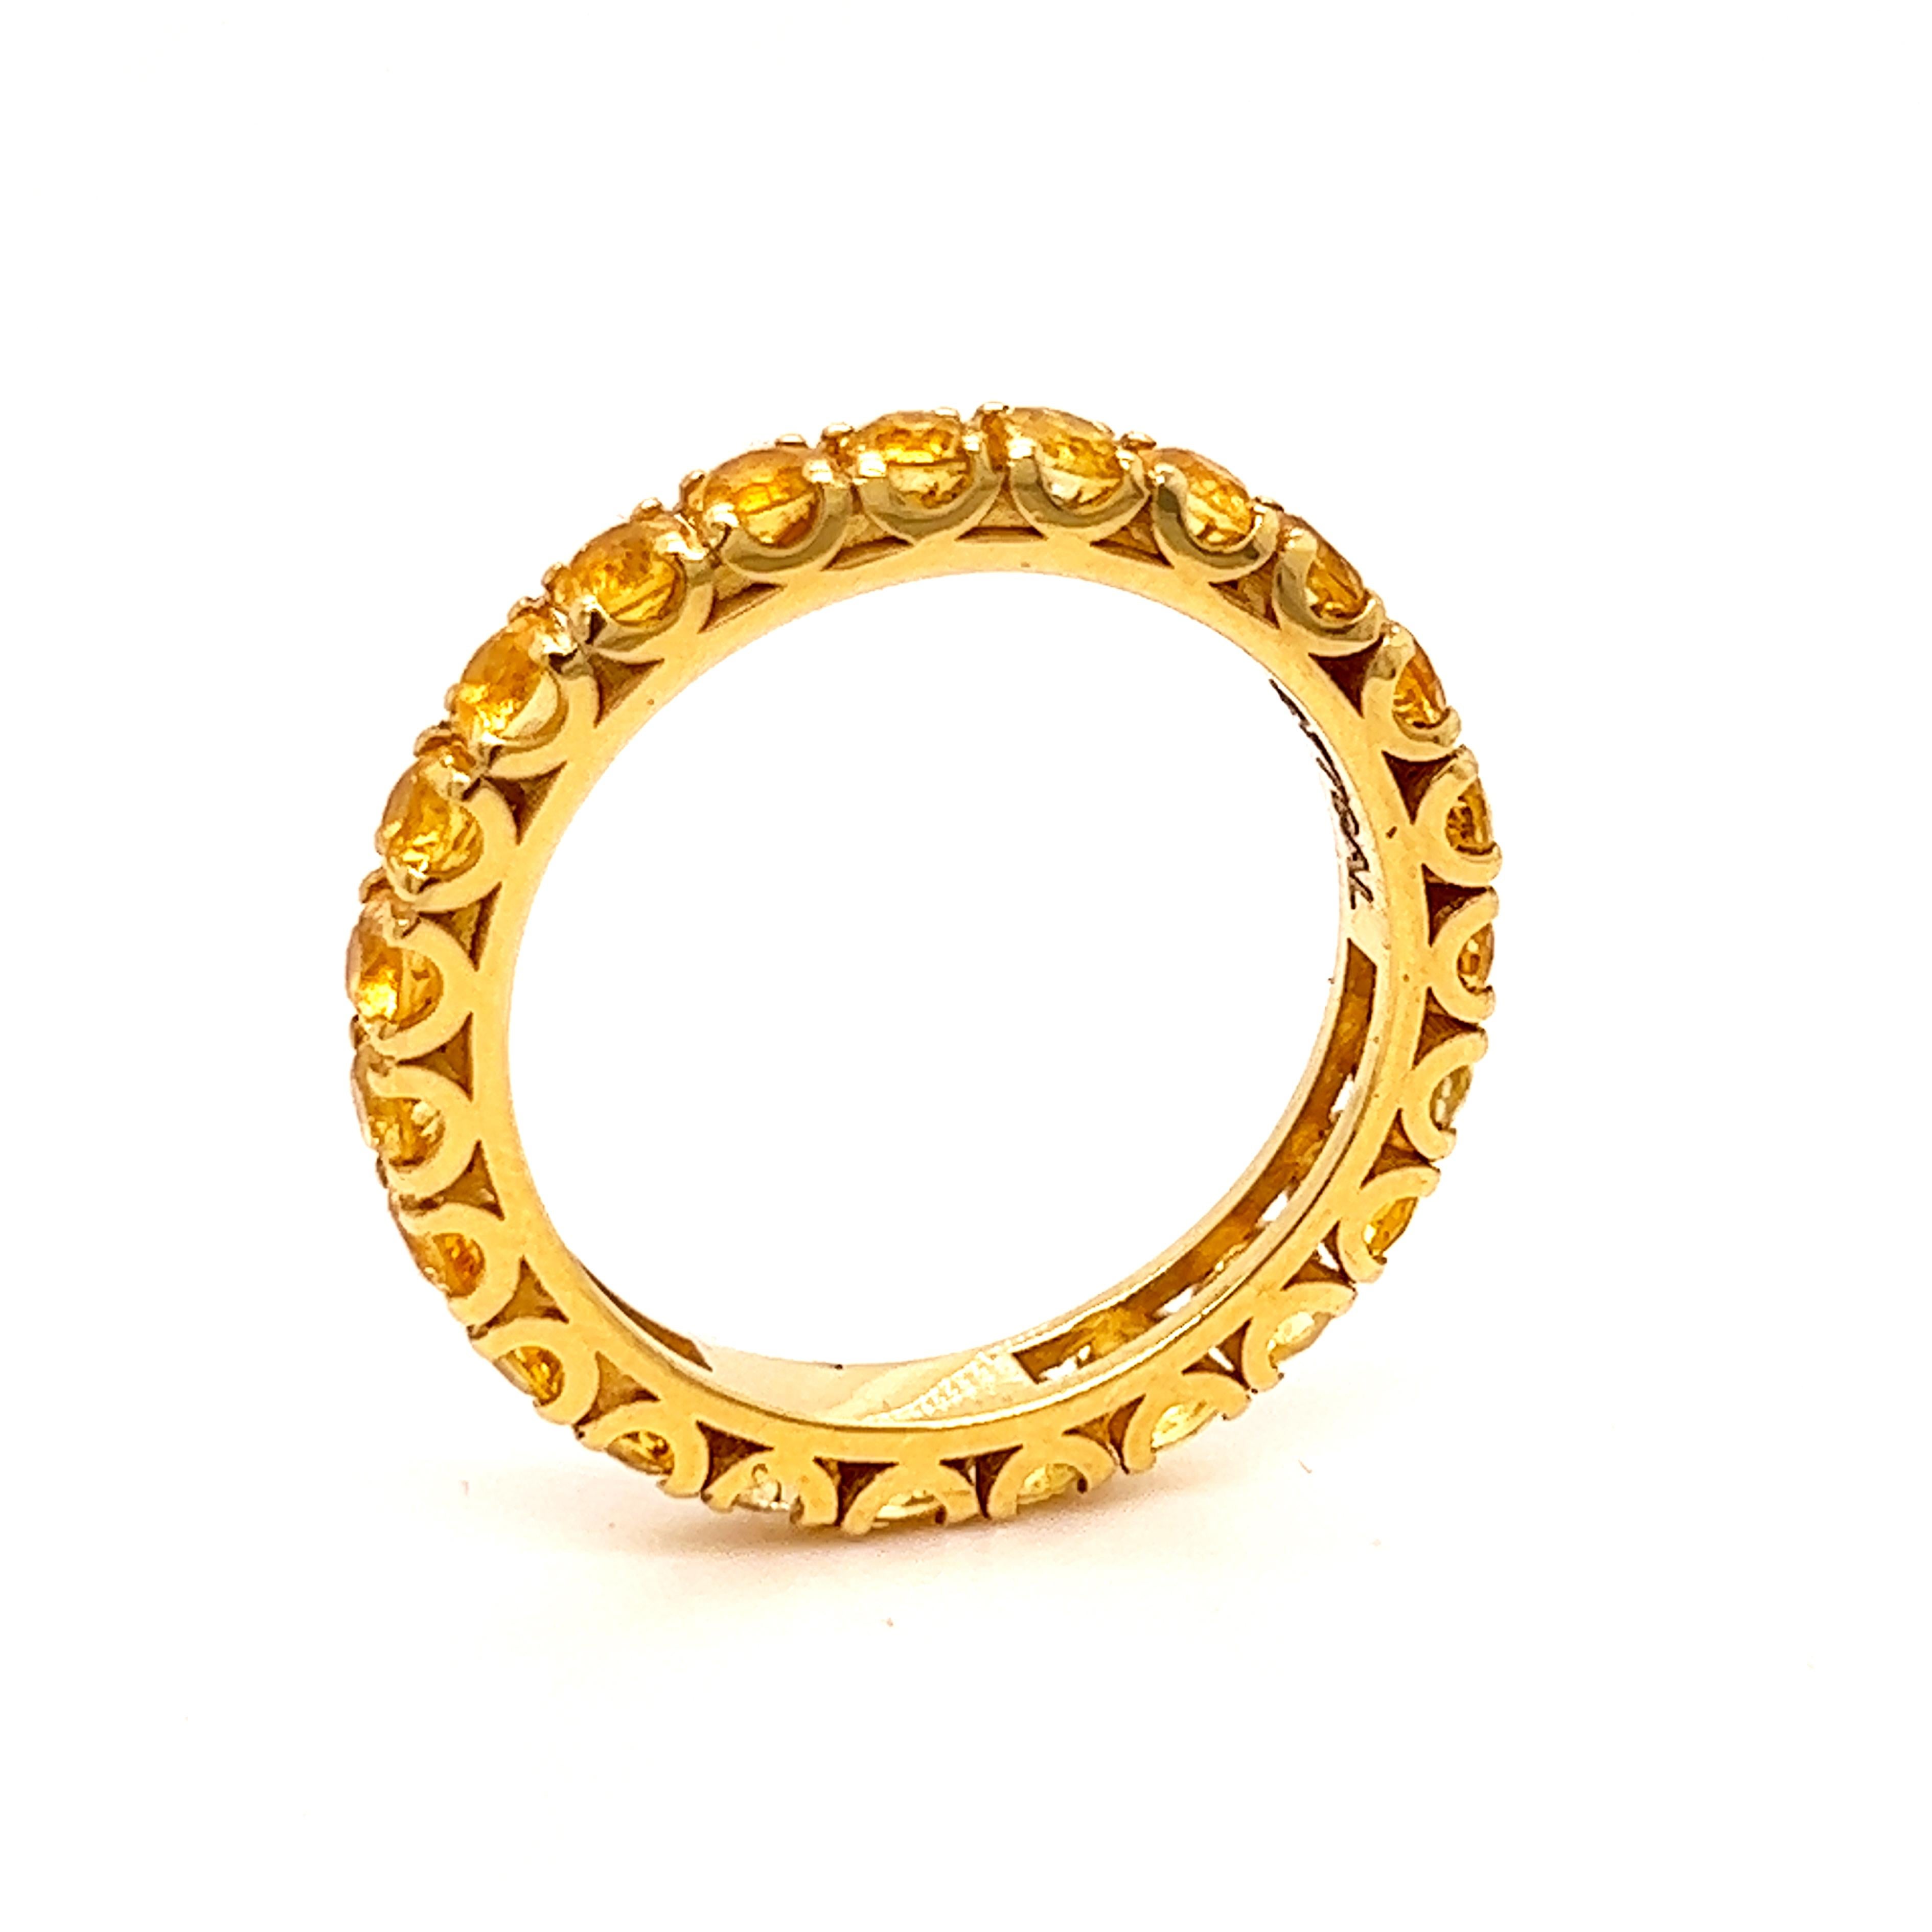 Contemporary Berca 2.11 Carat Natural Yellow Sapphire 18 Karat Gold Eternity Band Ring For Sale